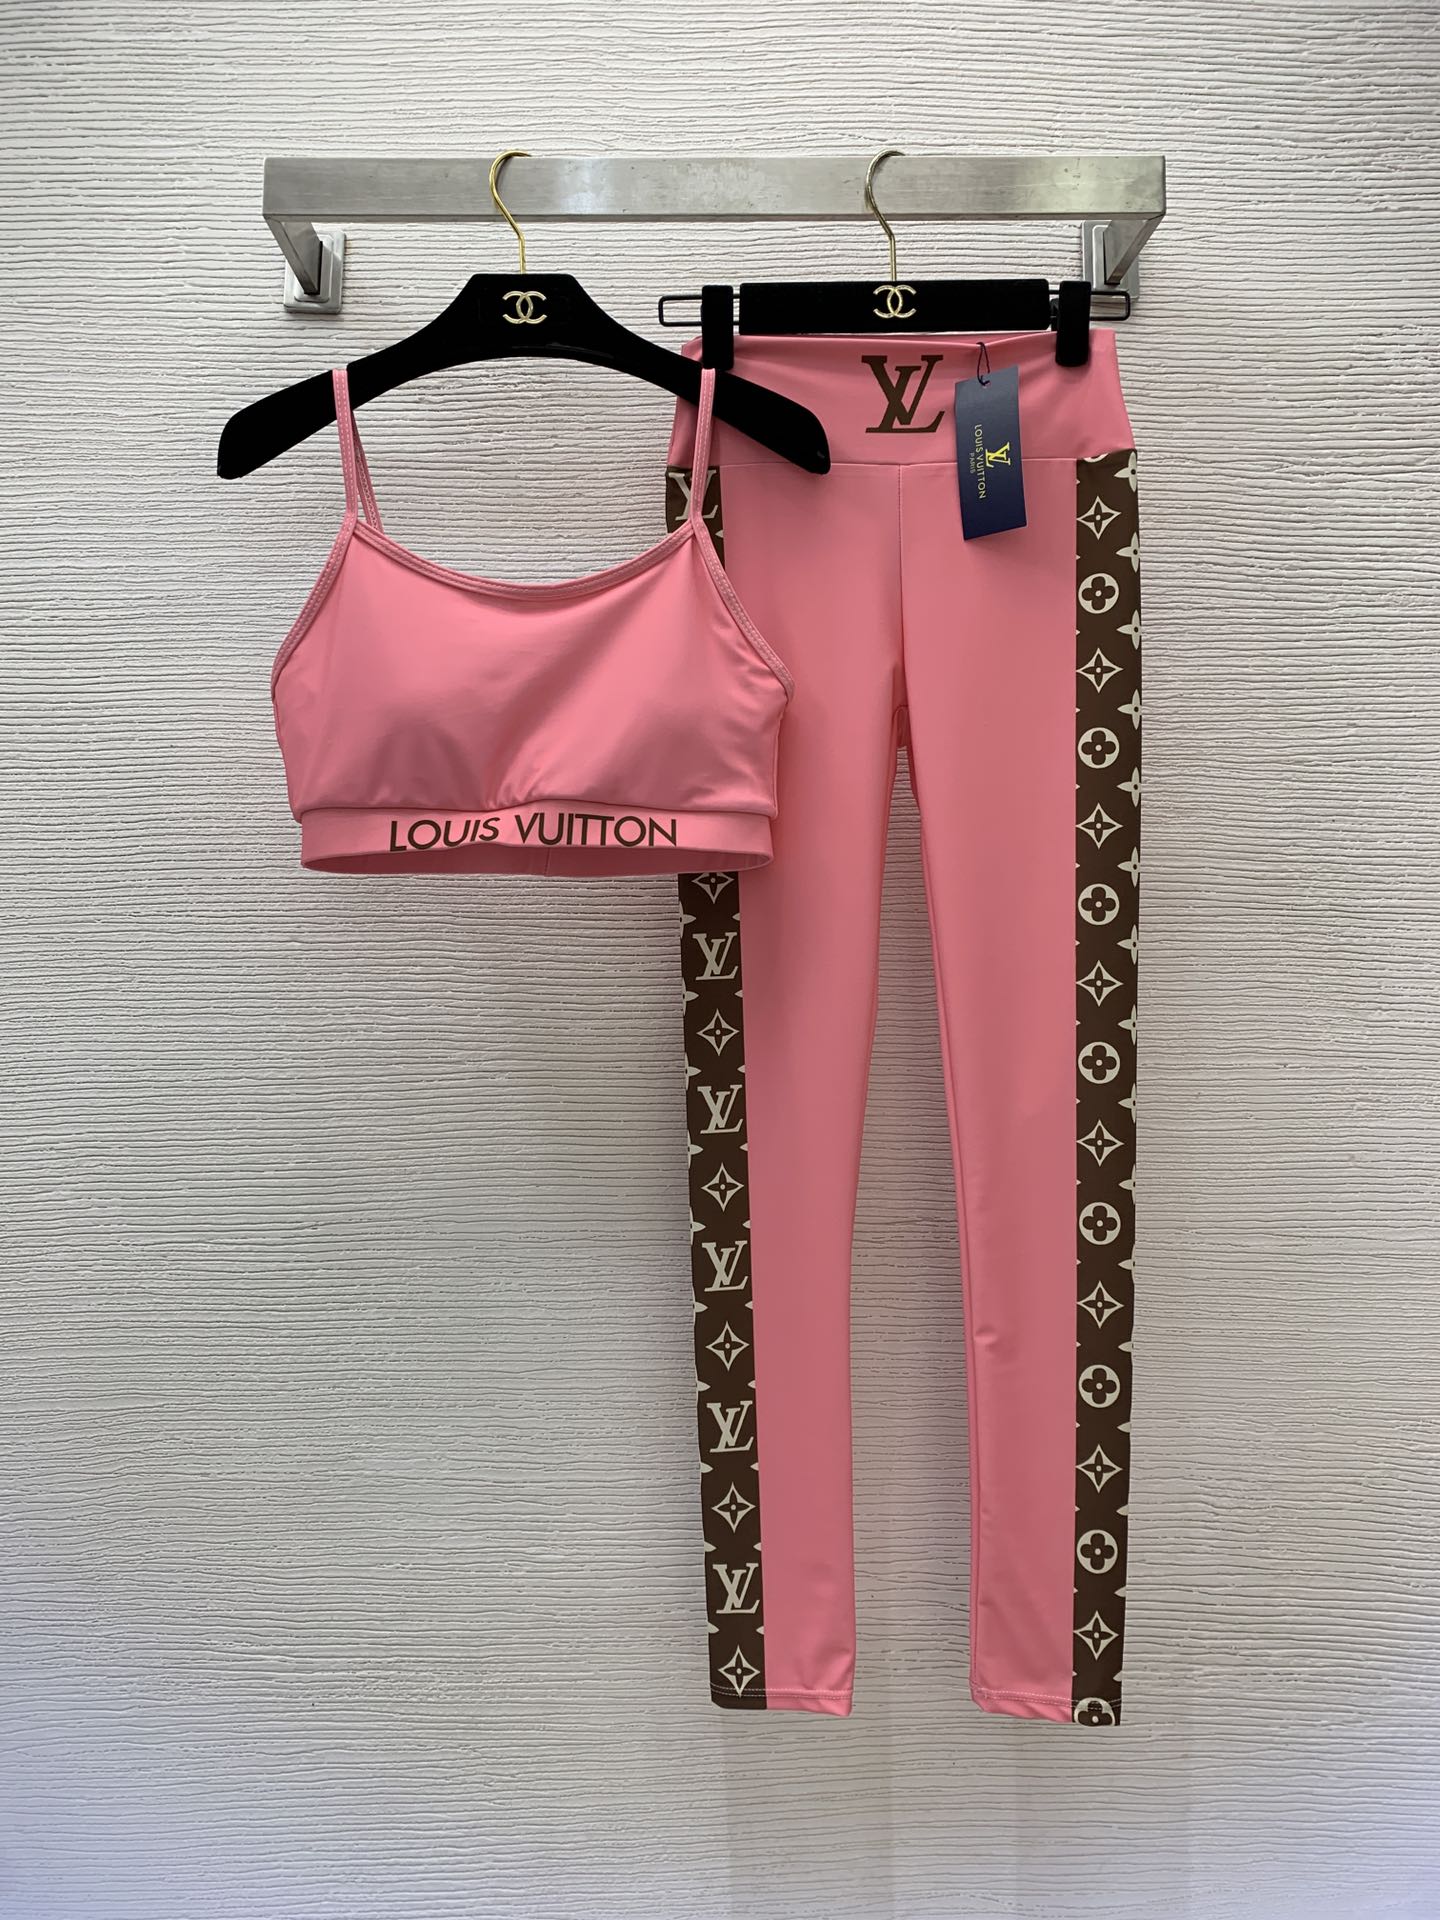 Louis Vuitton Clothing Shirts & Blouses Tank Top Yoga Clothes Pink Printing Spring/Summer Collection Sweatpants